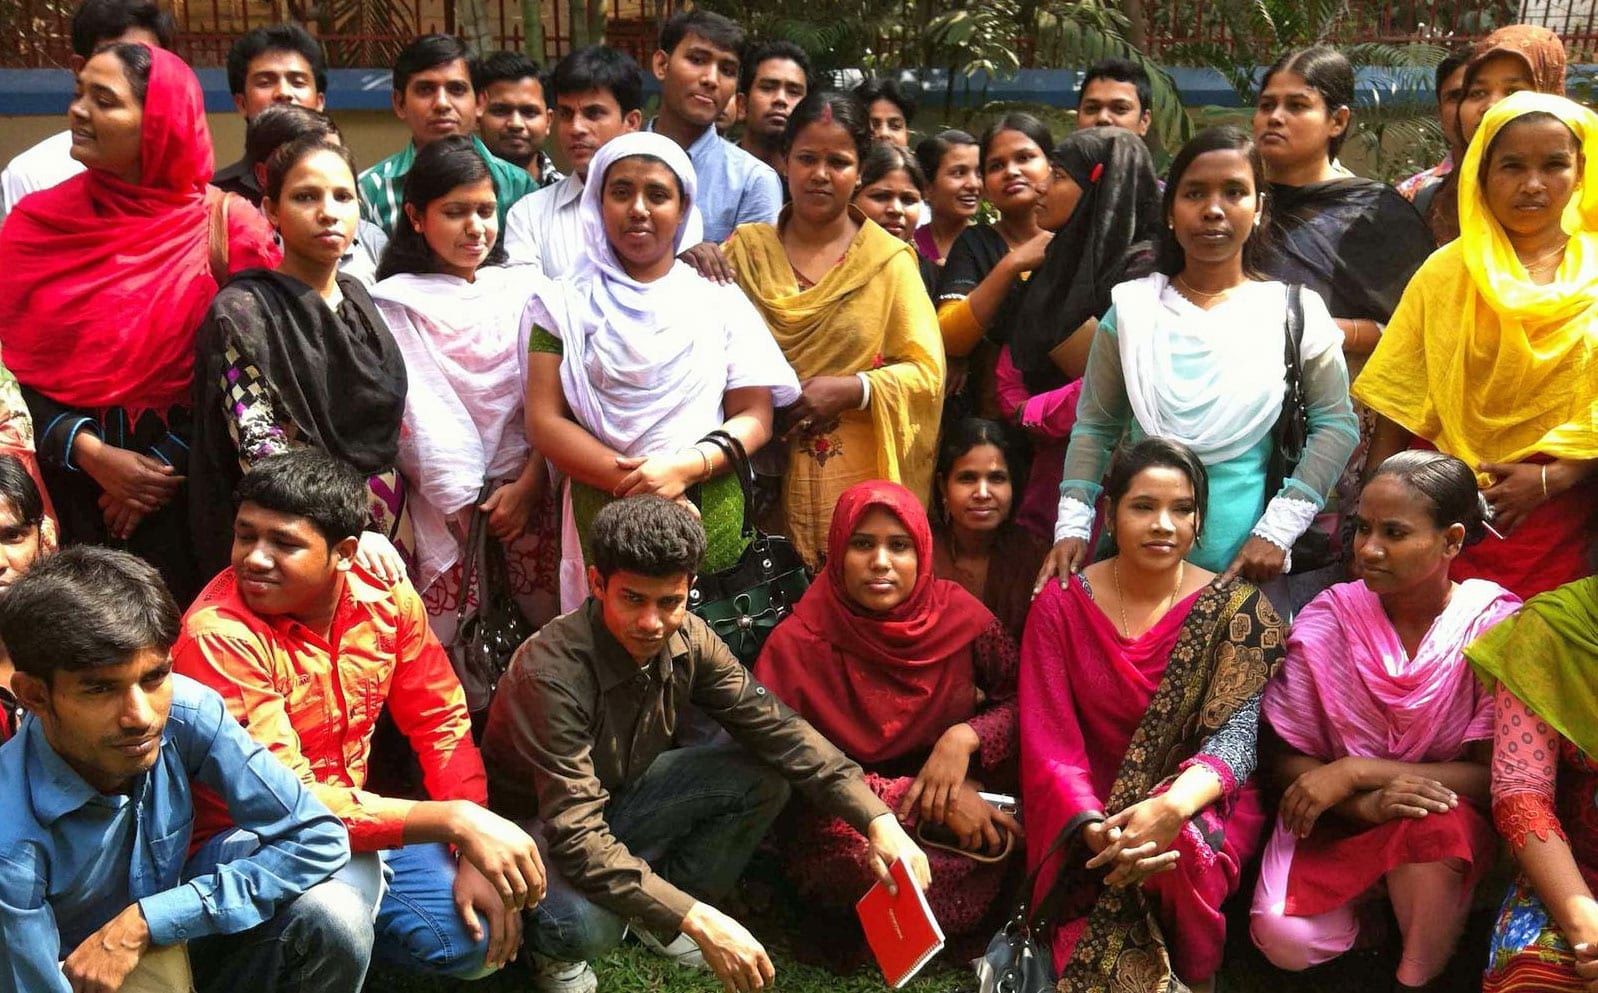 Garment worker leaders at a meeting